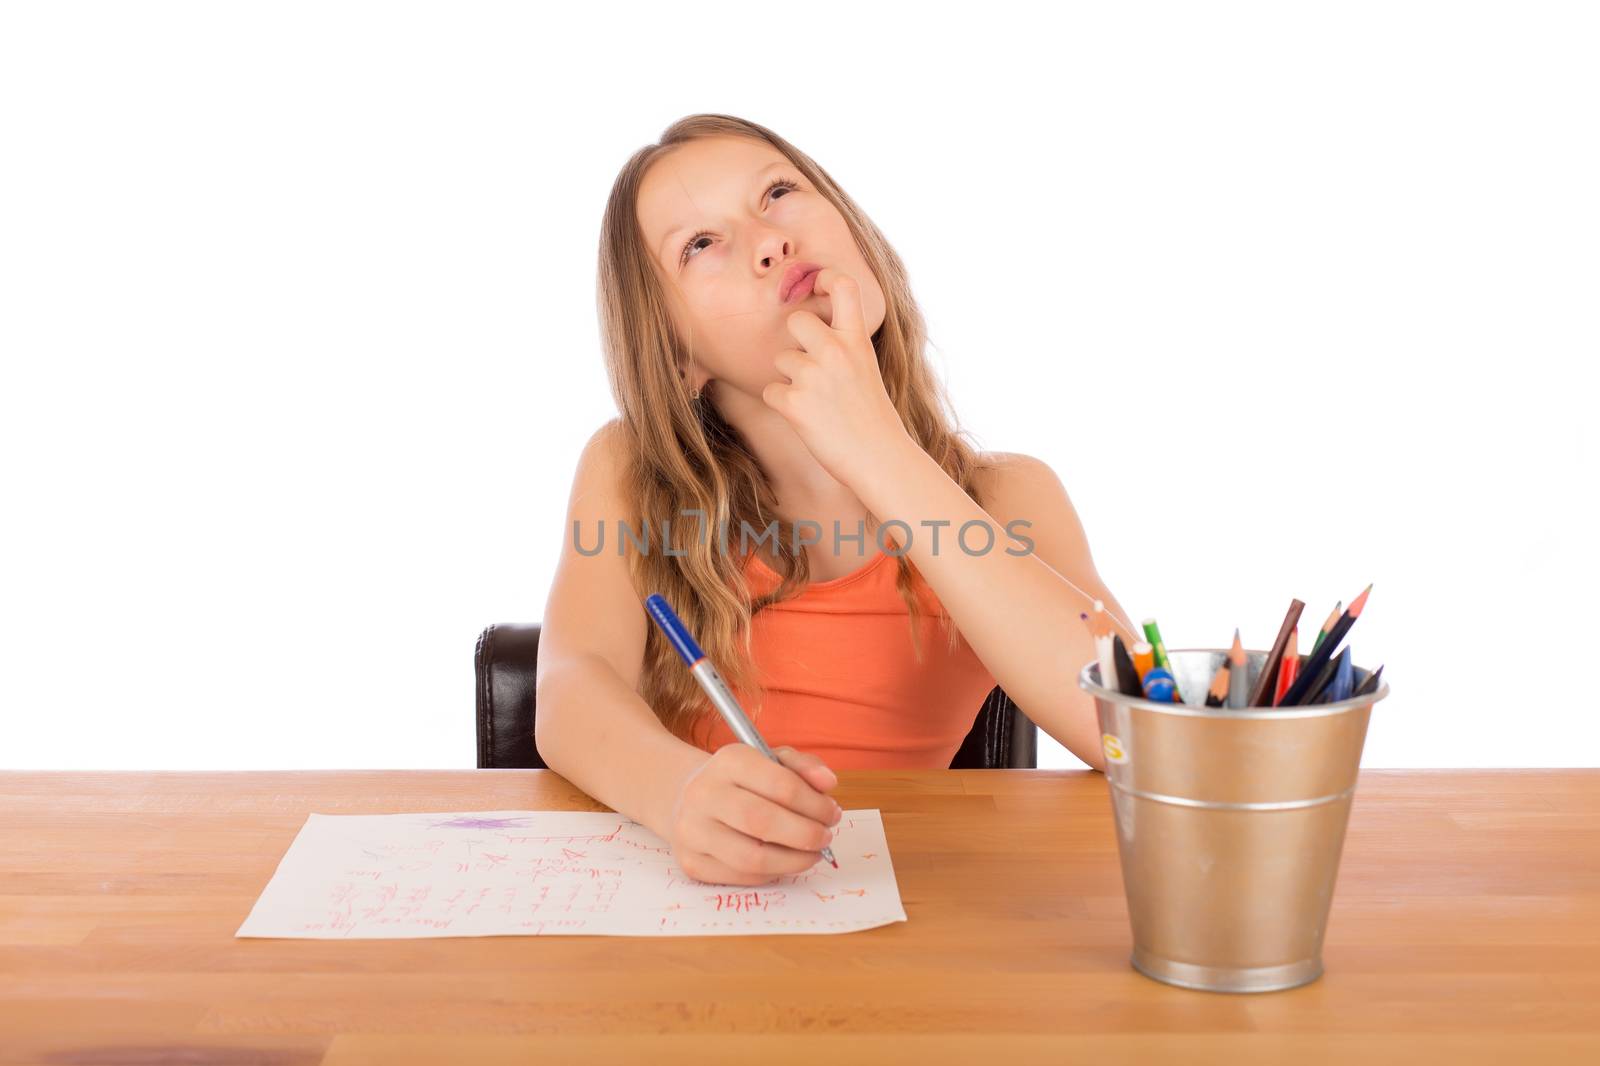 Child sitting at a wooden table trying to make a drawing. Isolated on a white background.